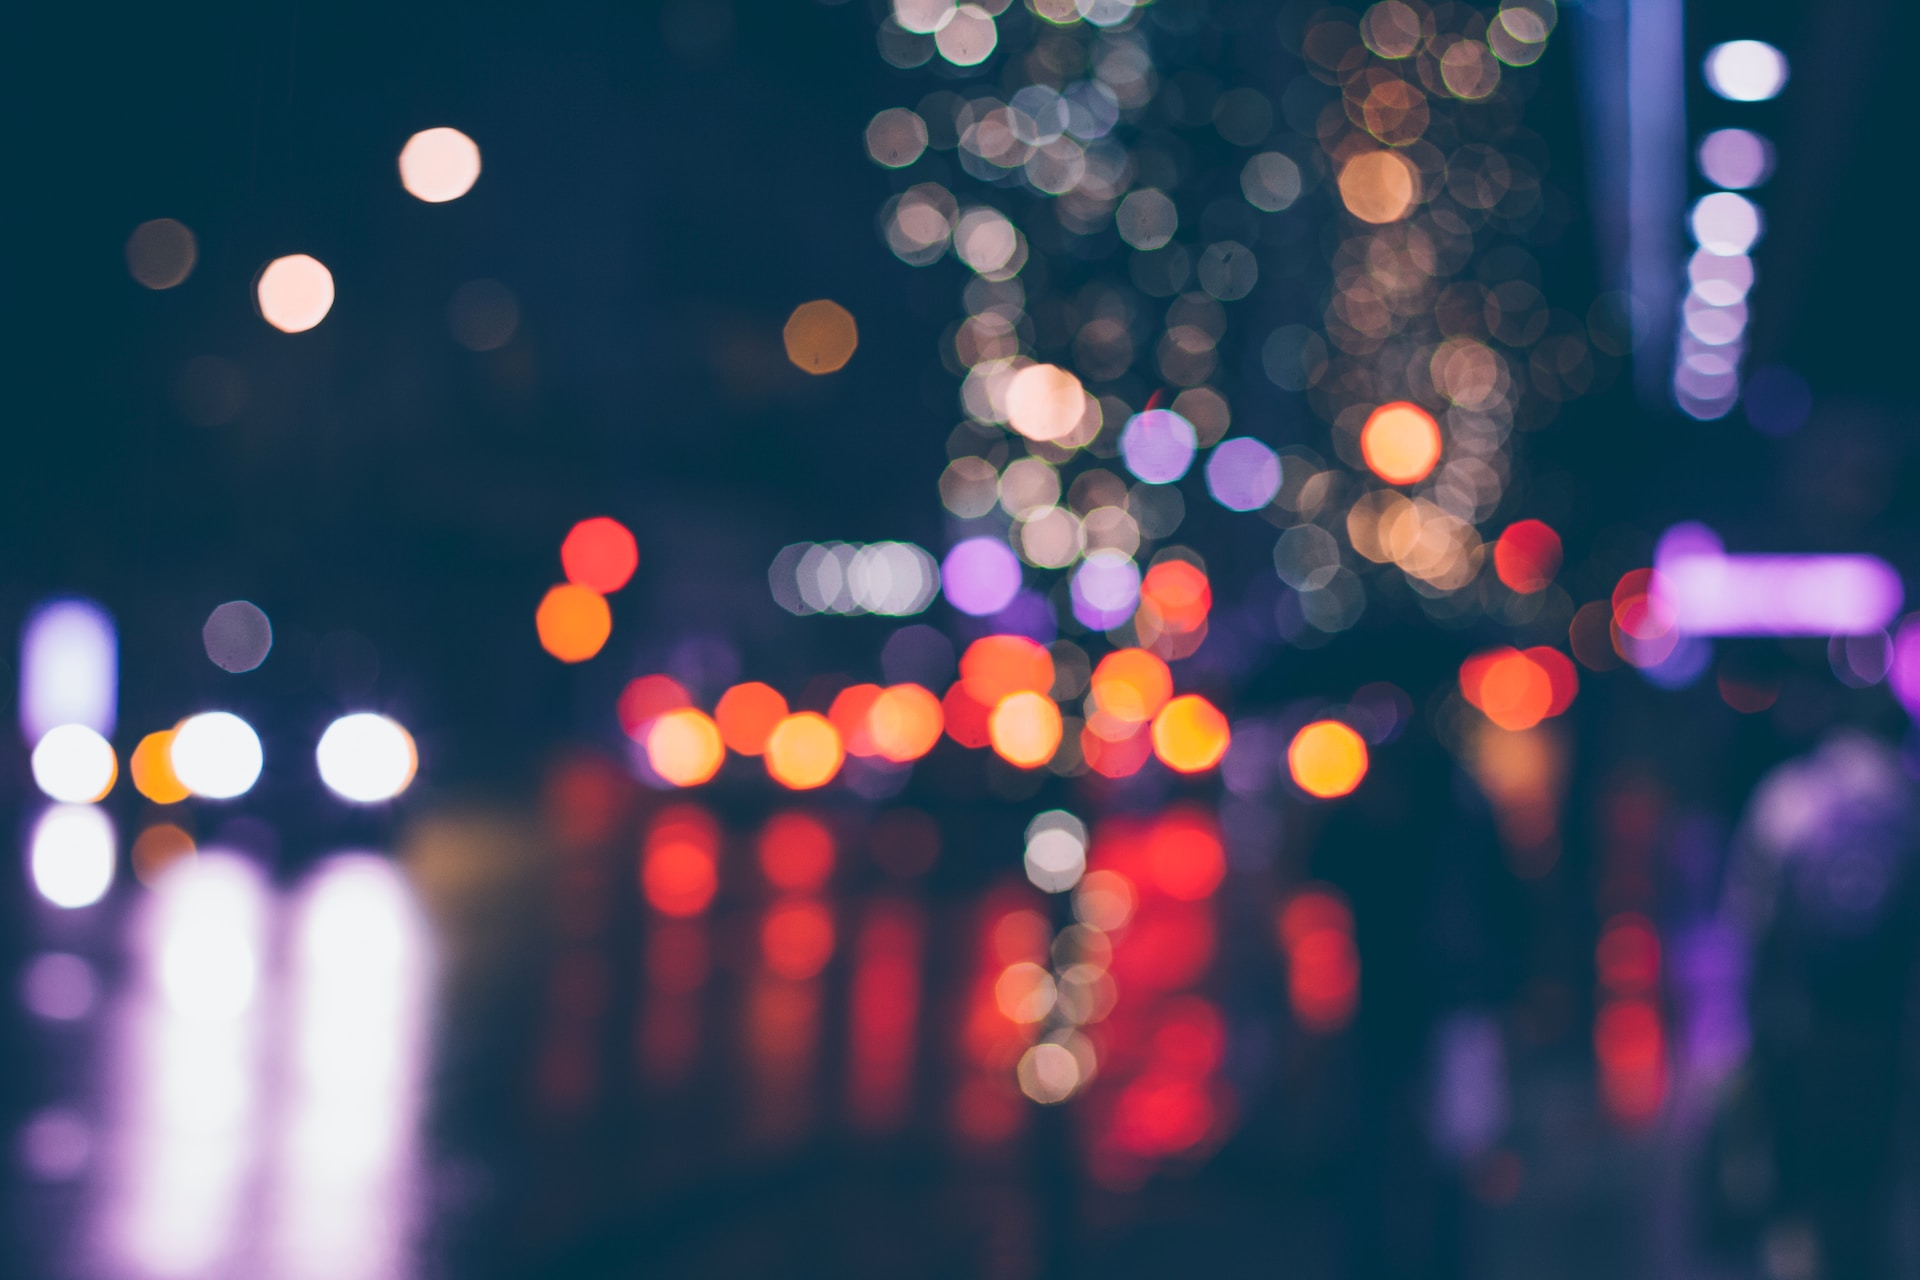 Bokeh effect of city lights and vehicles passing by the road at night